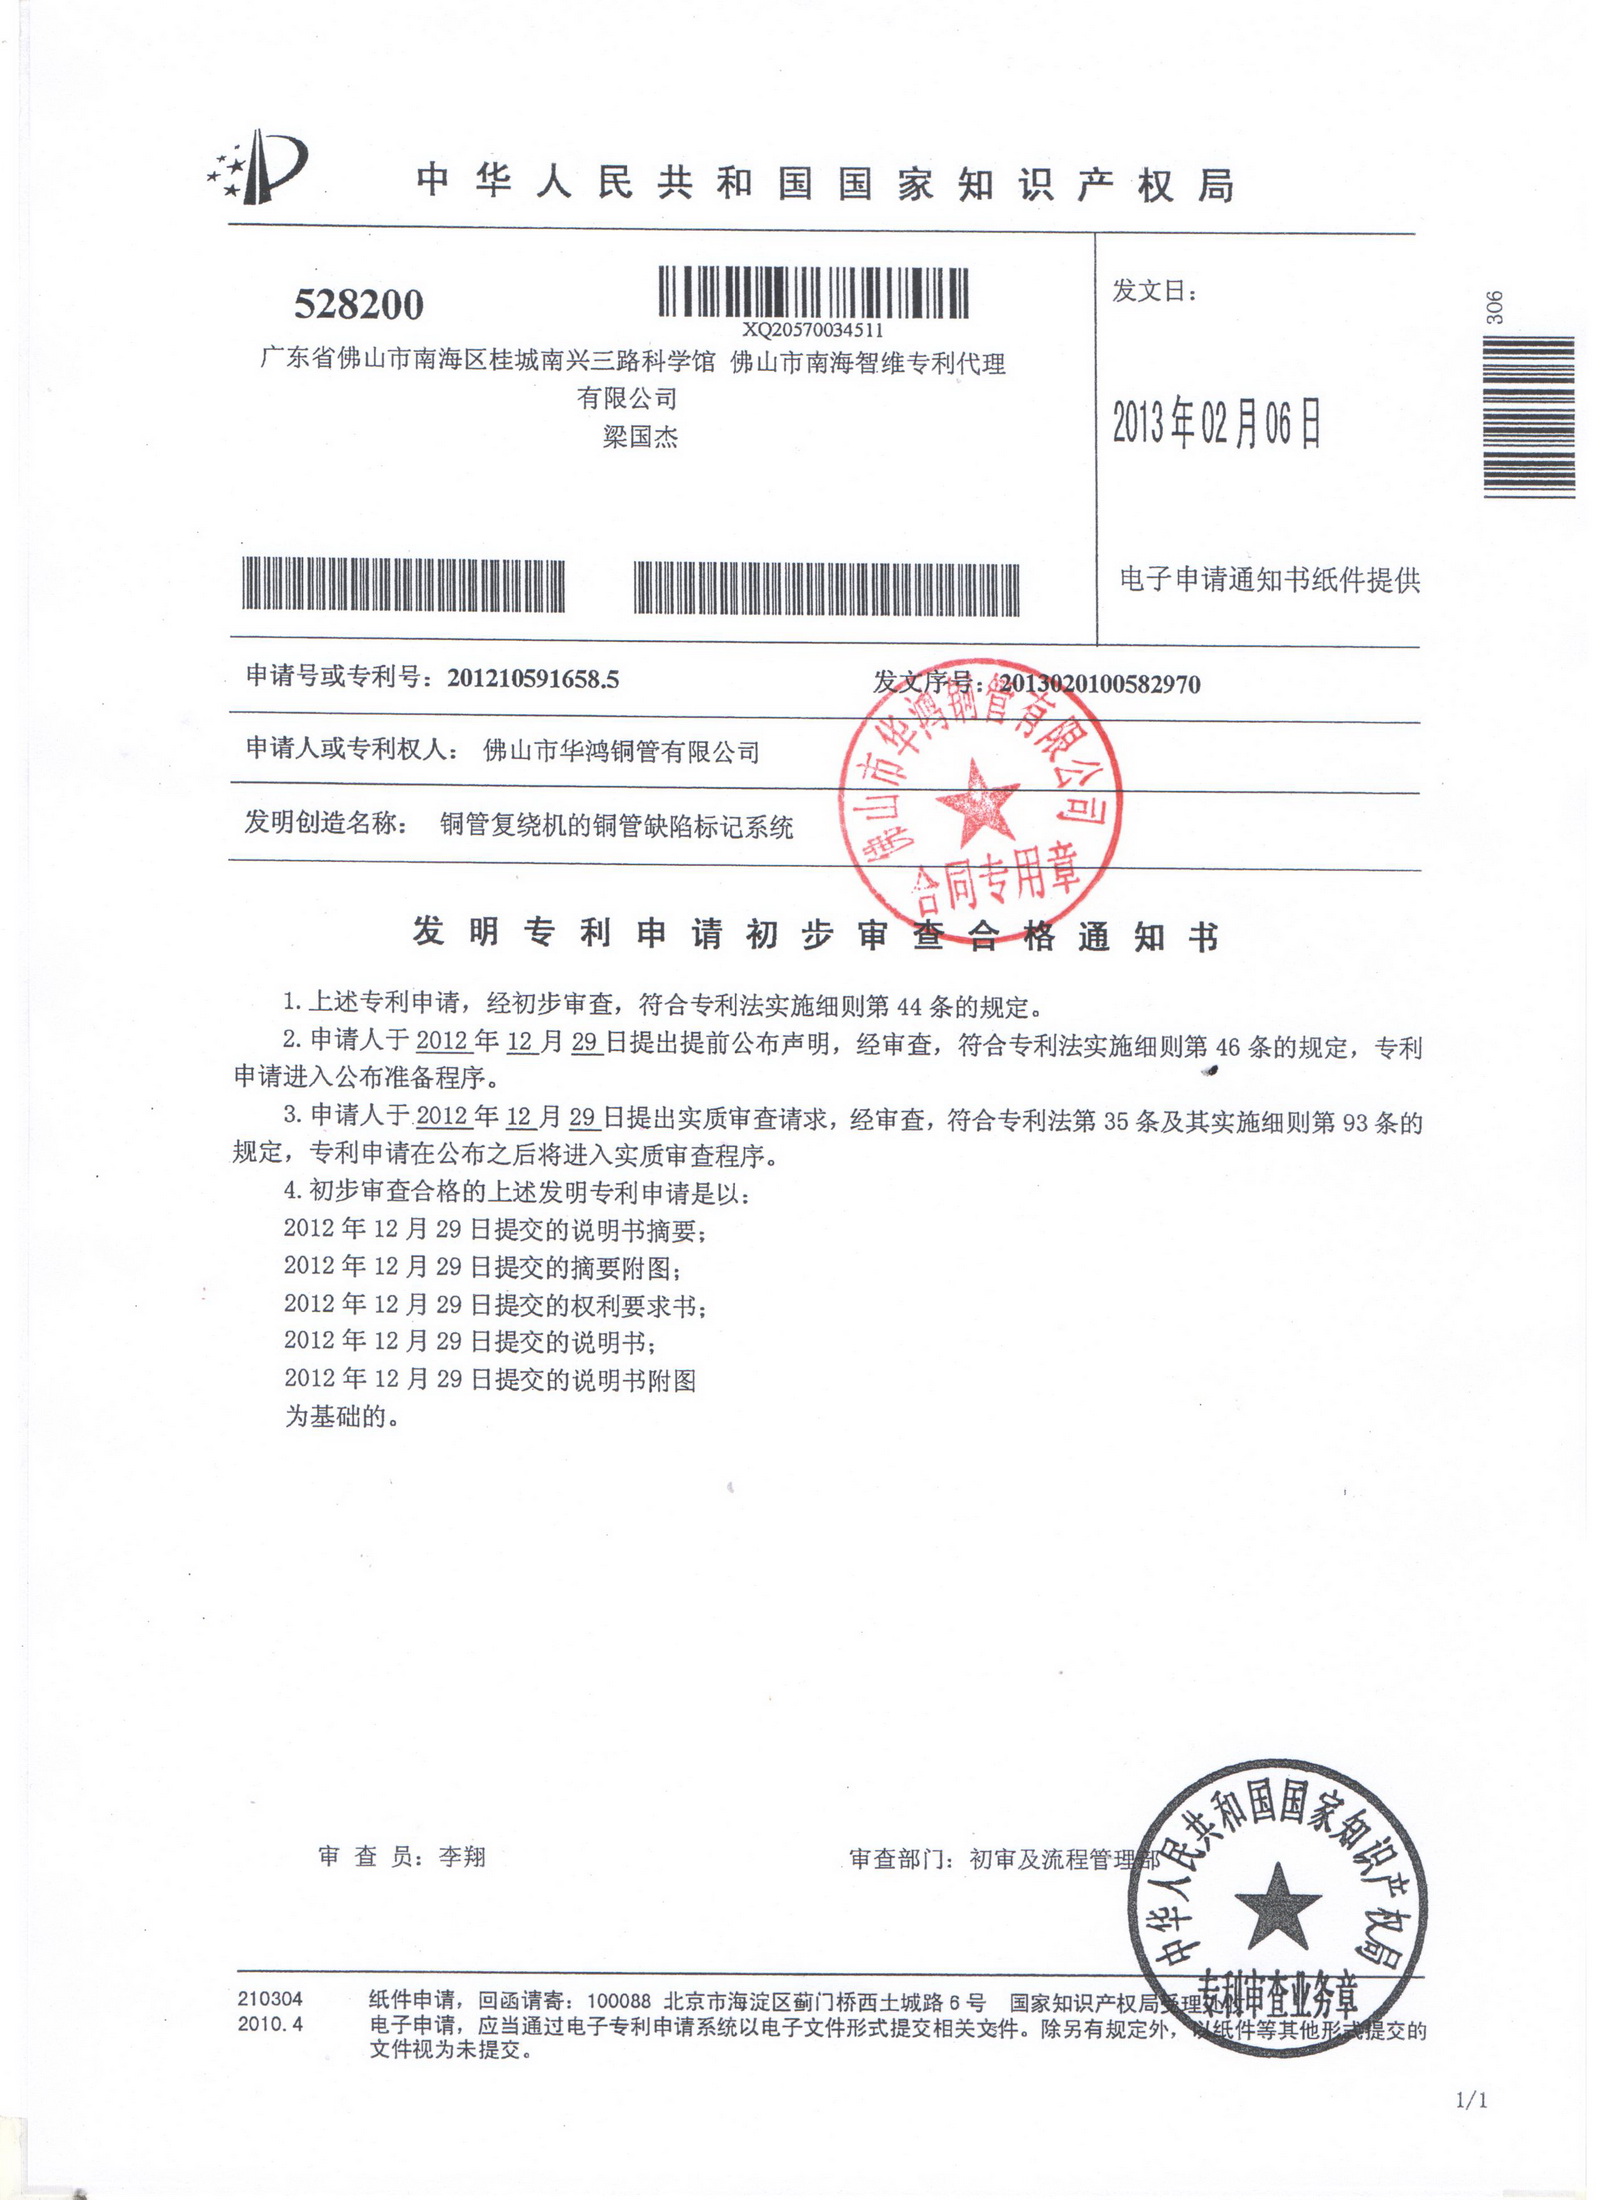 Notification of qualified preliminary examination of the invention patent application